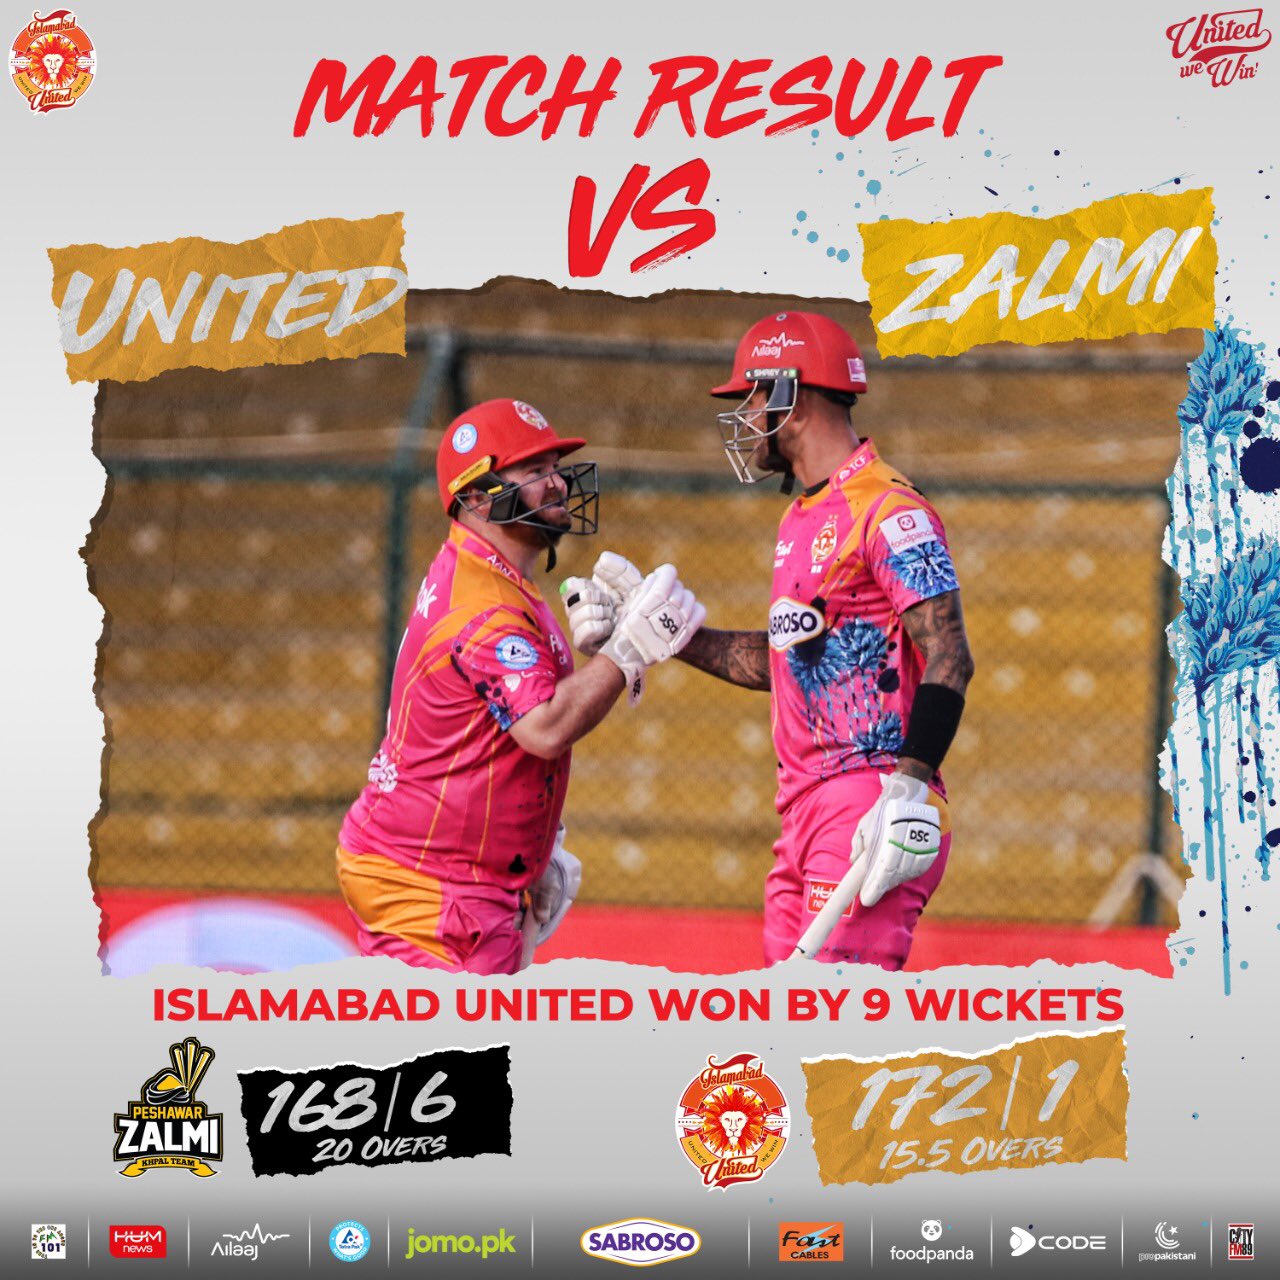 In the fifth match of Pakistan Super League season seven, Islamabad United easily defeated Peshawar Zalmi by 9 wickets.